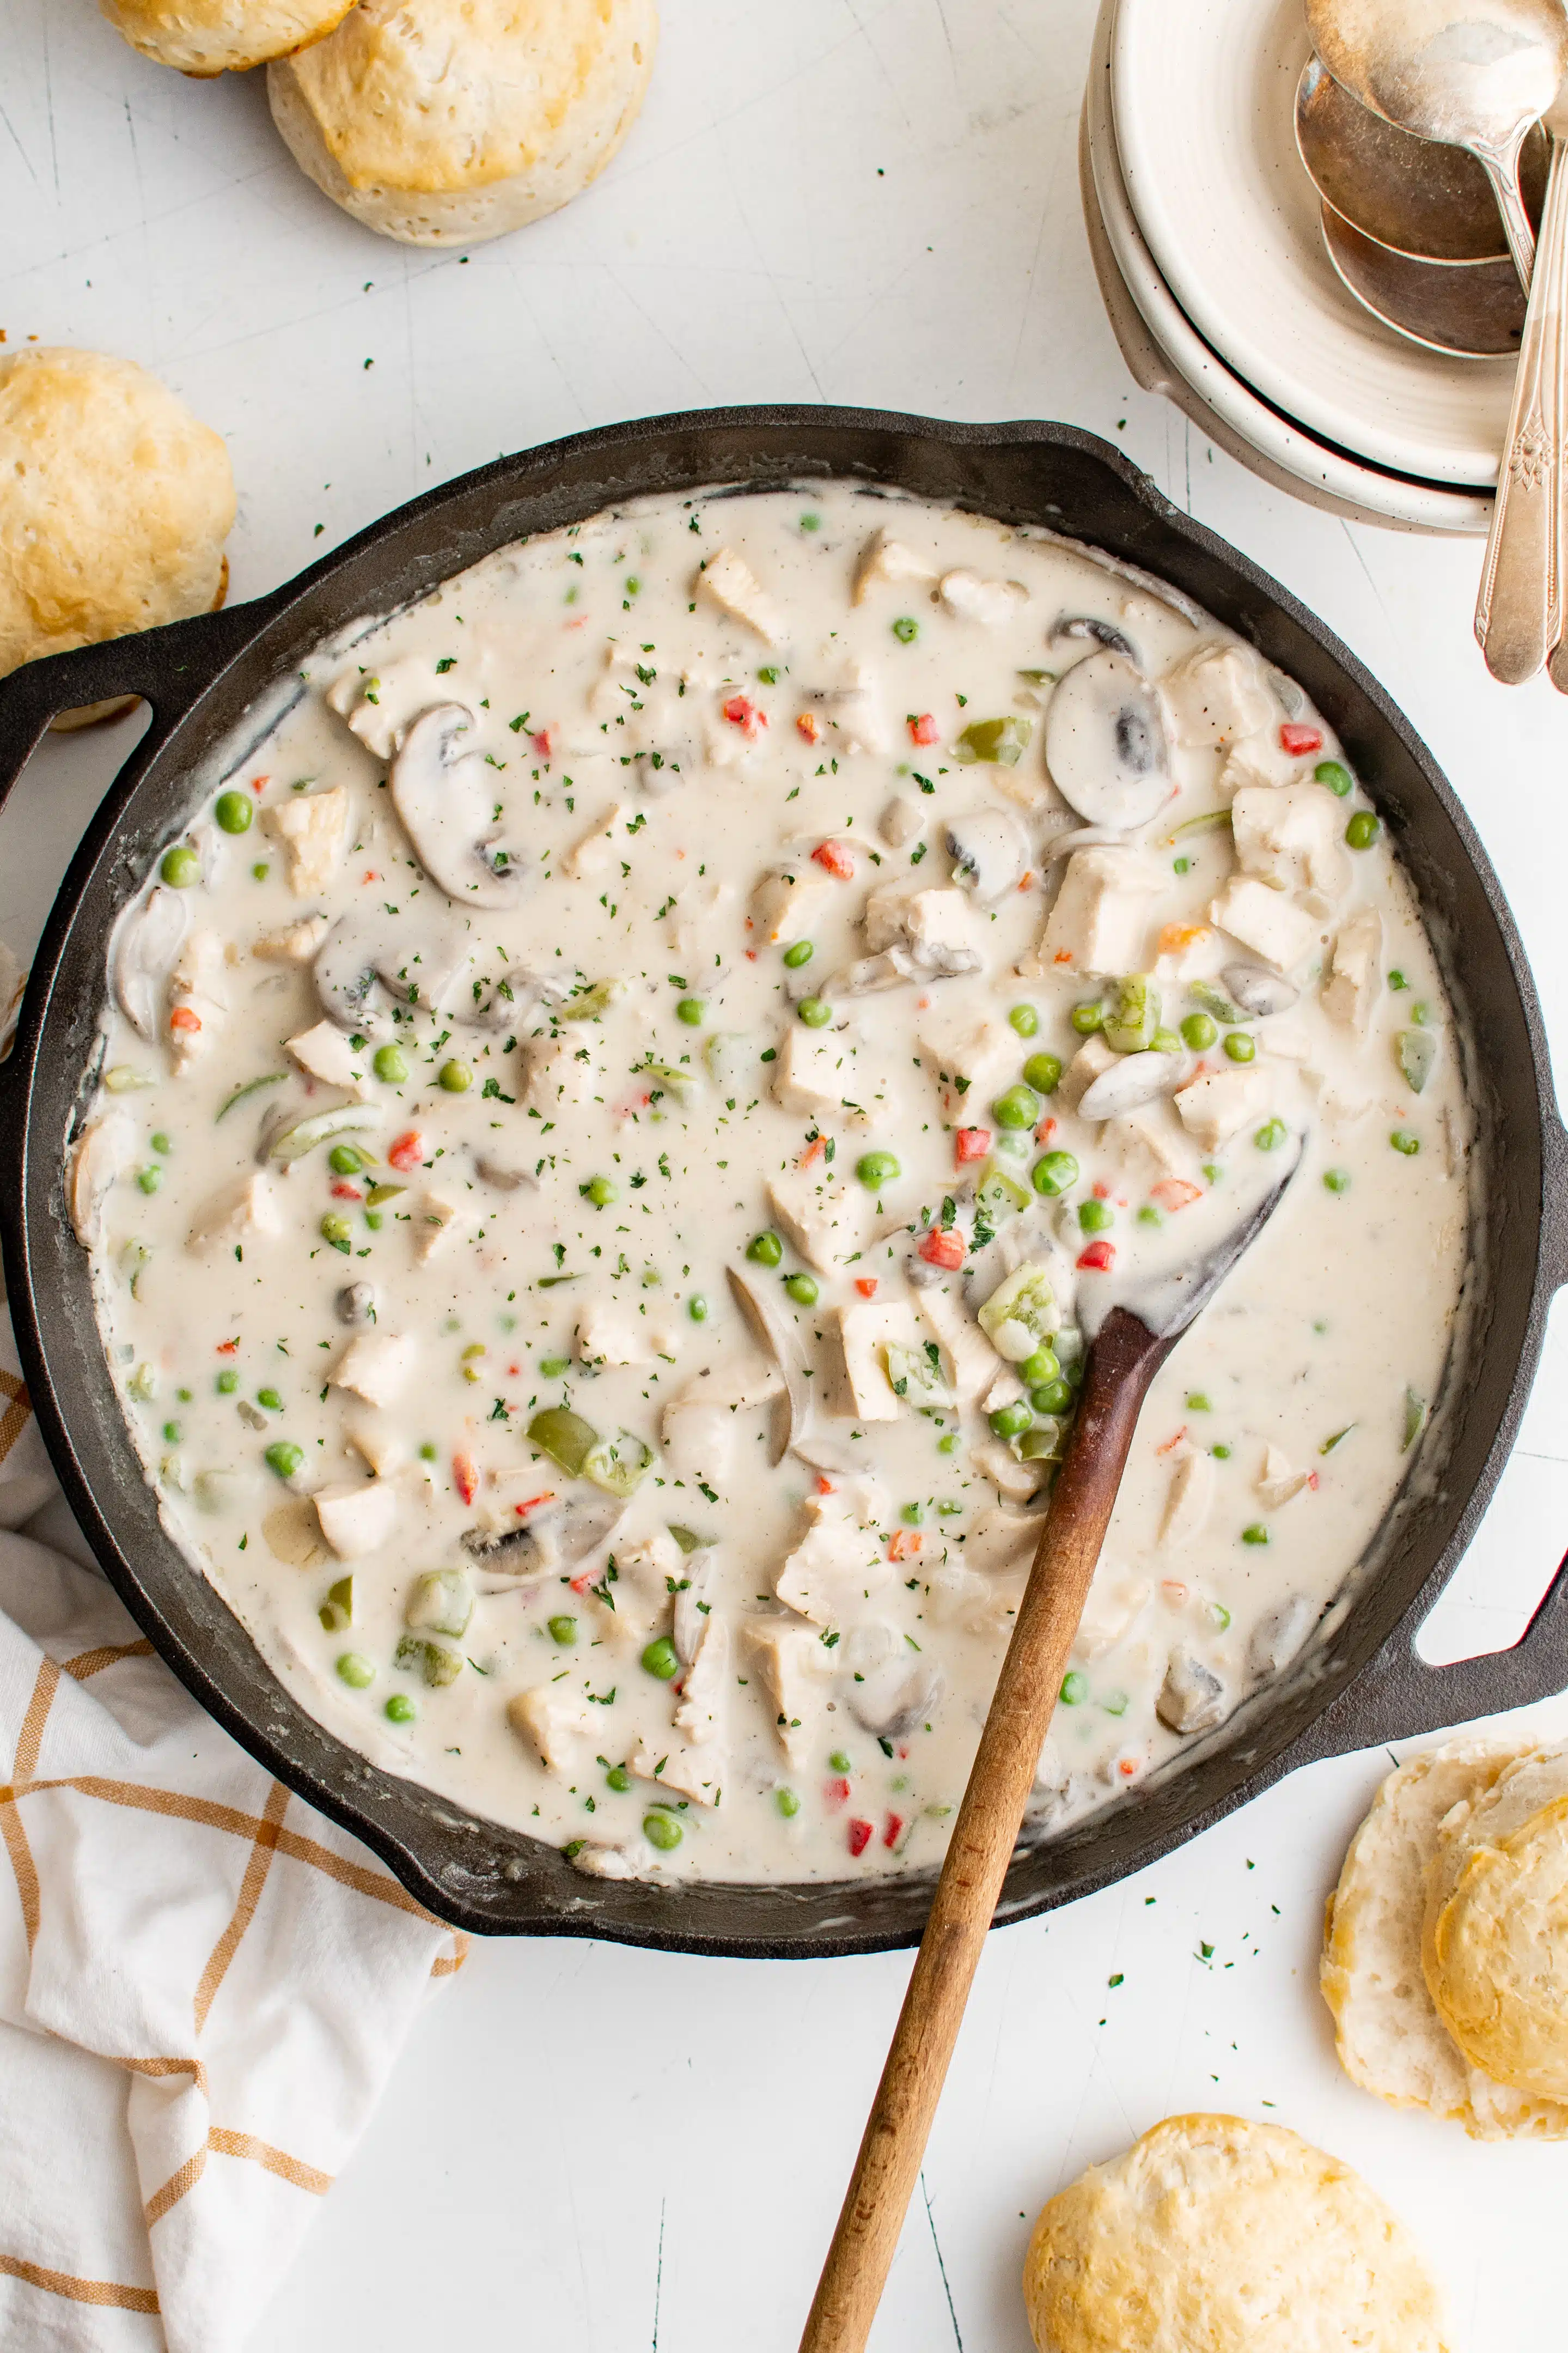 Cast iron skillet filled with creamy chicken a la king surrounded by buttermilk biscuits.